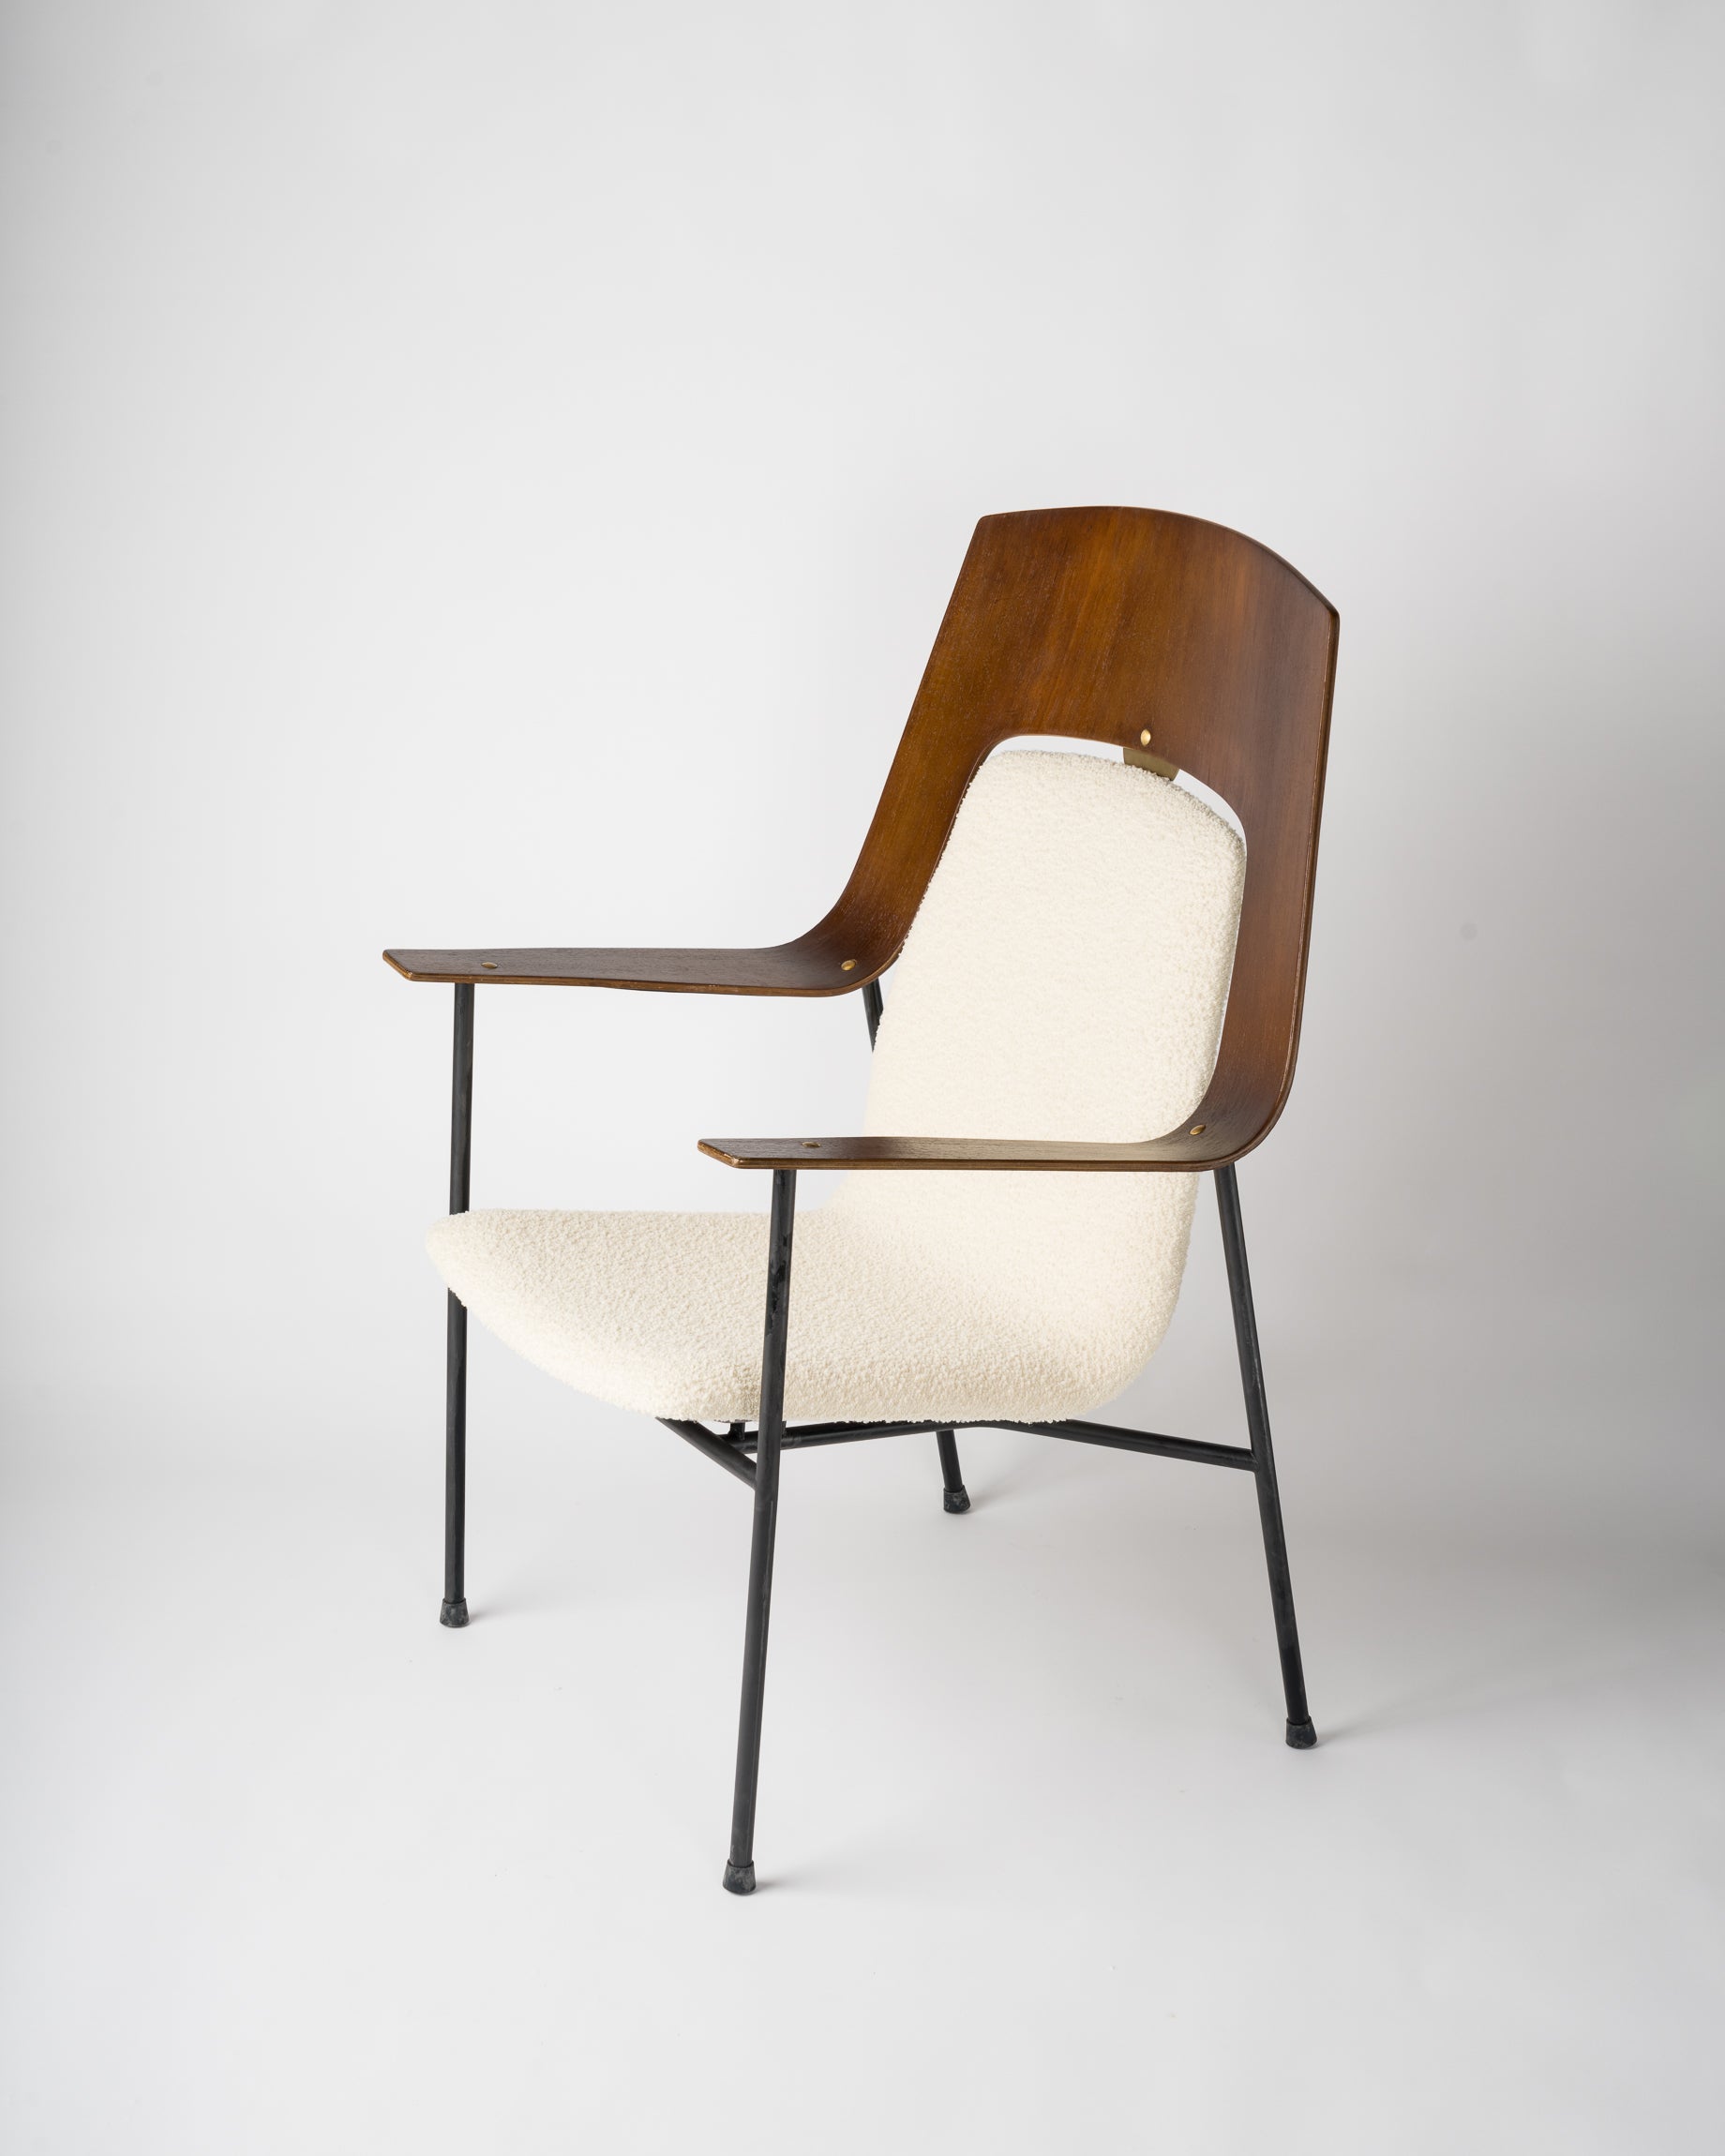 Midcentury Plywood and Cream White Armchair Attributed Robin Day, UK, 1960s